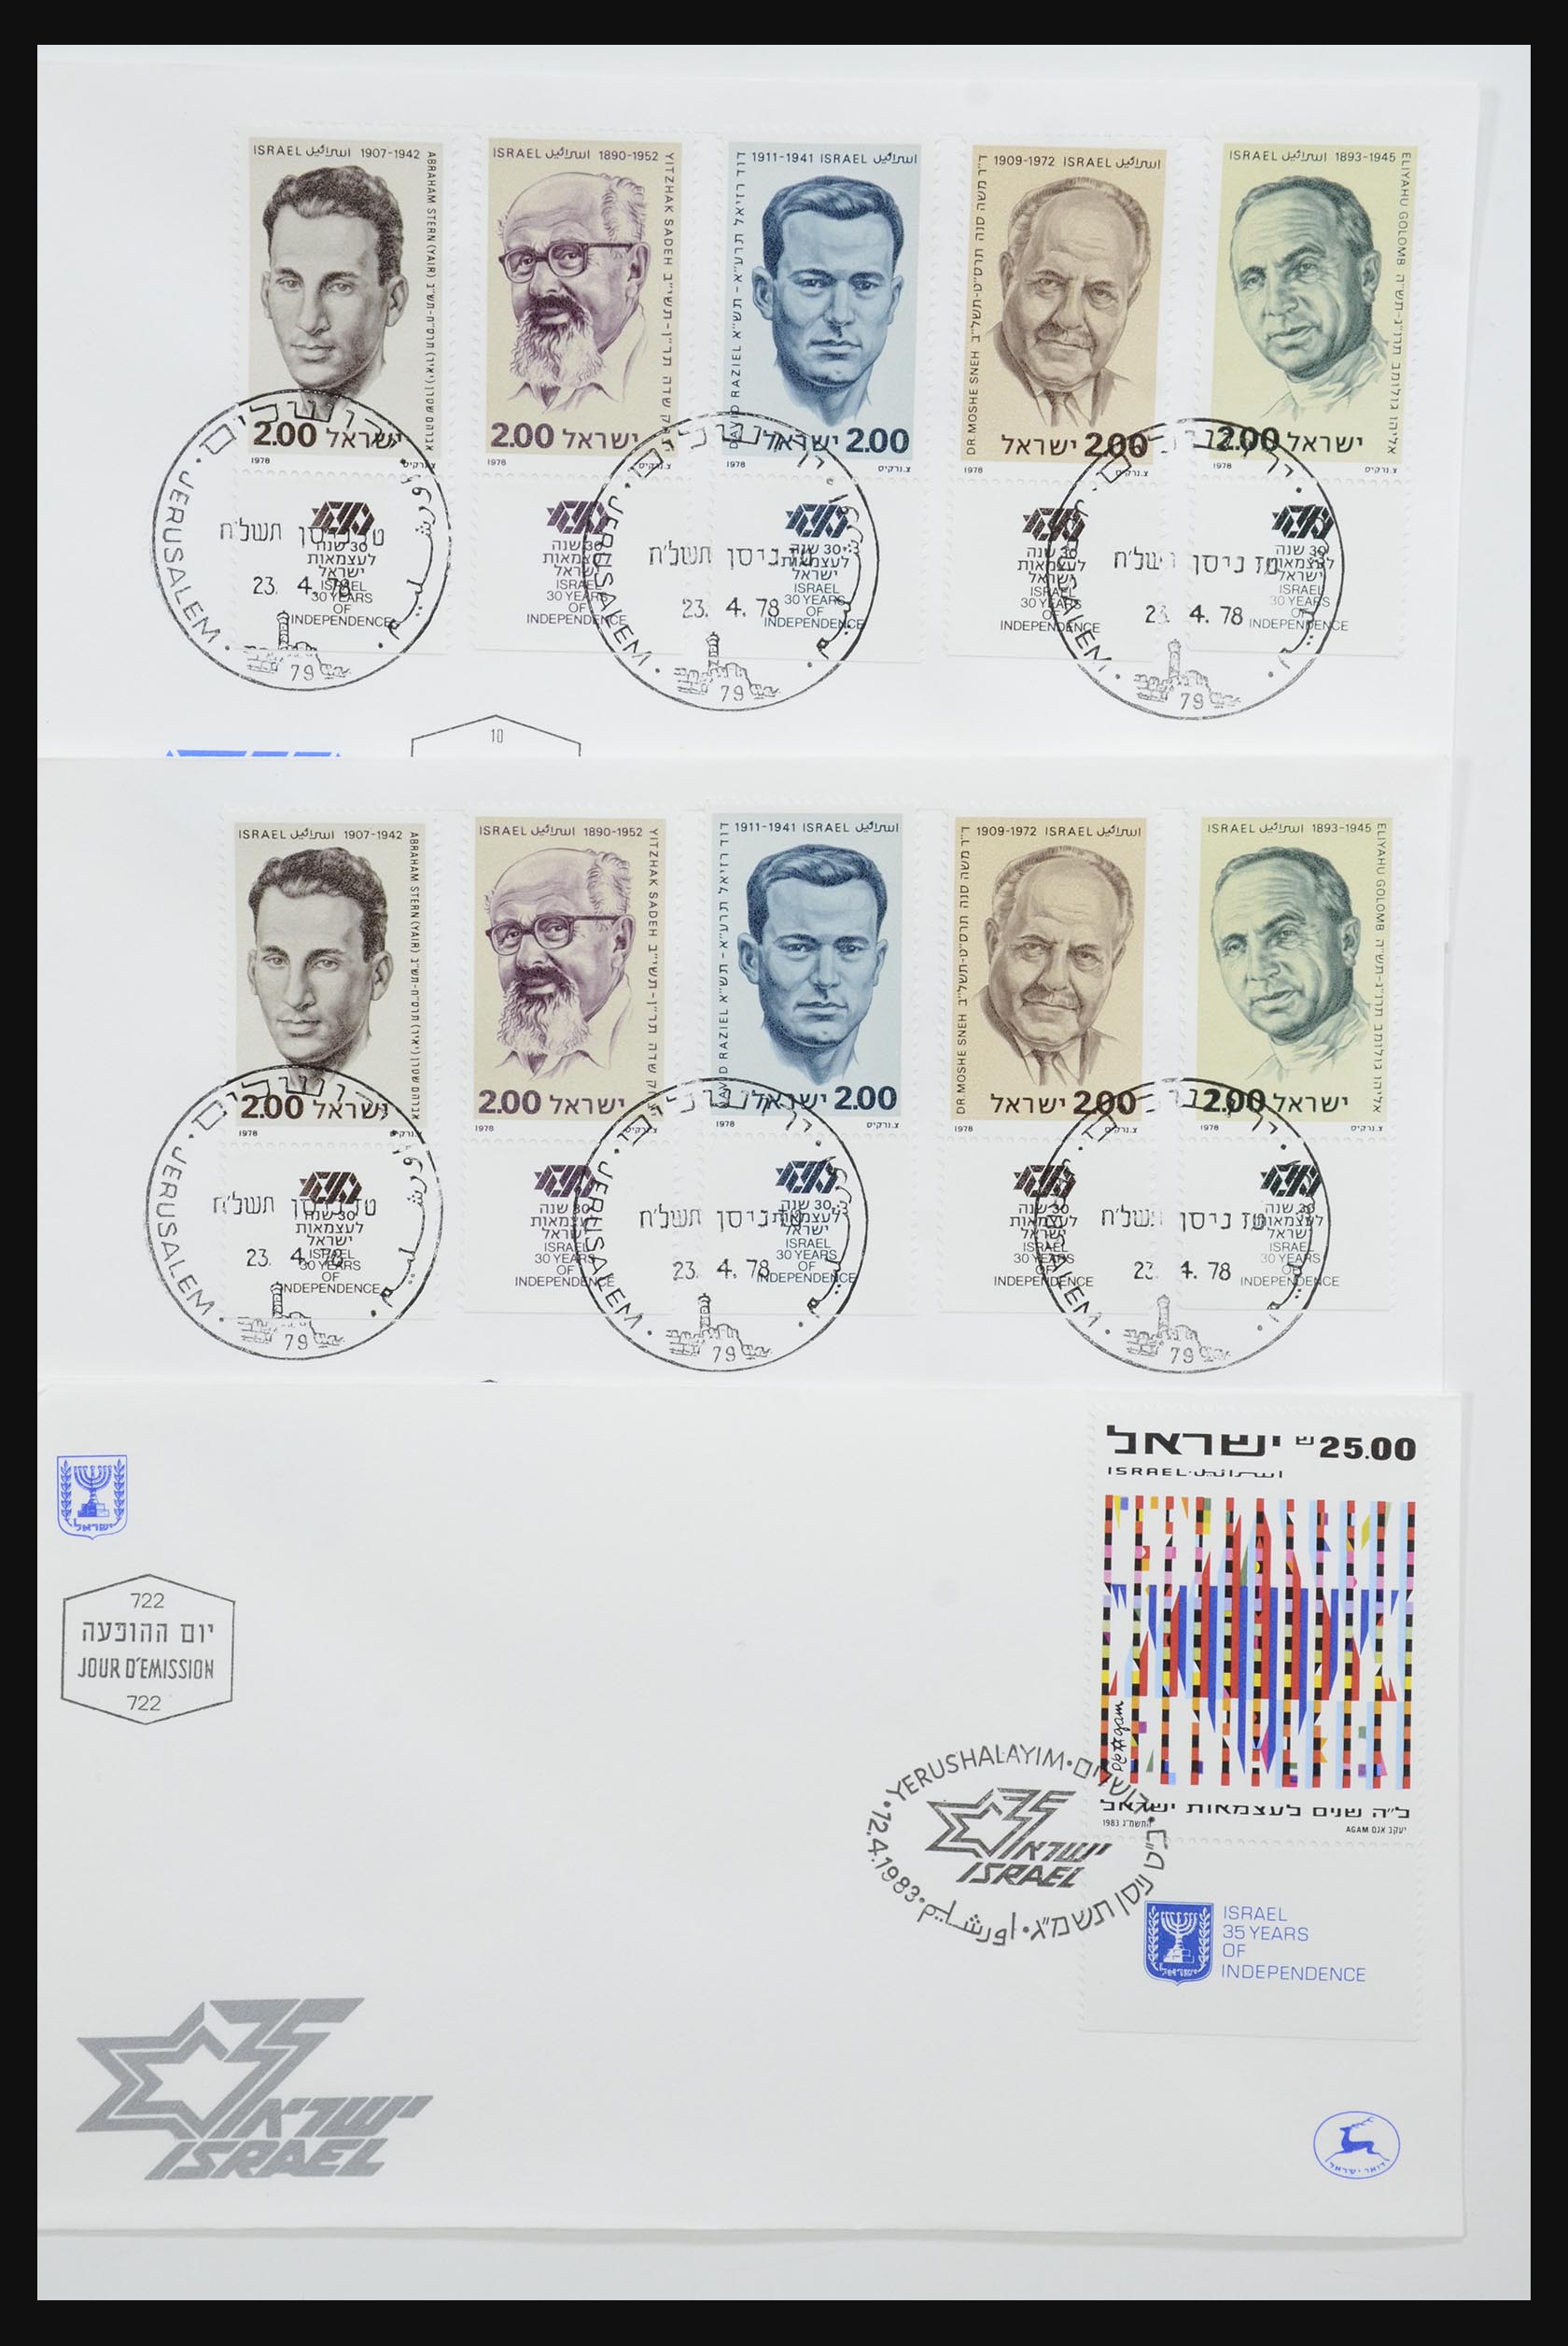 31924 007 - 31924 Israël fdc-collectie 1957-2003.